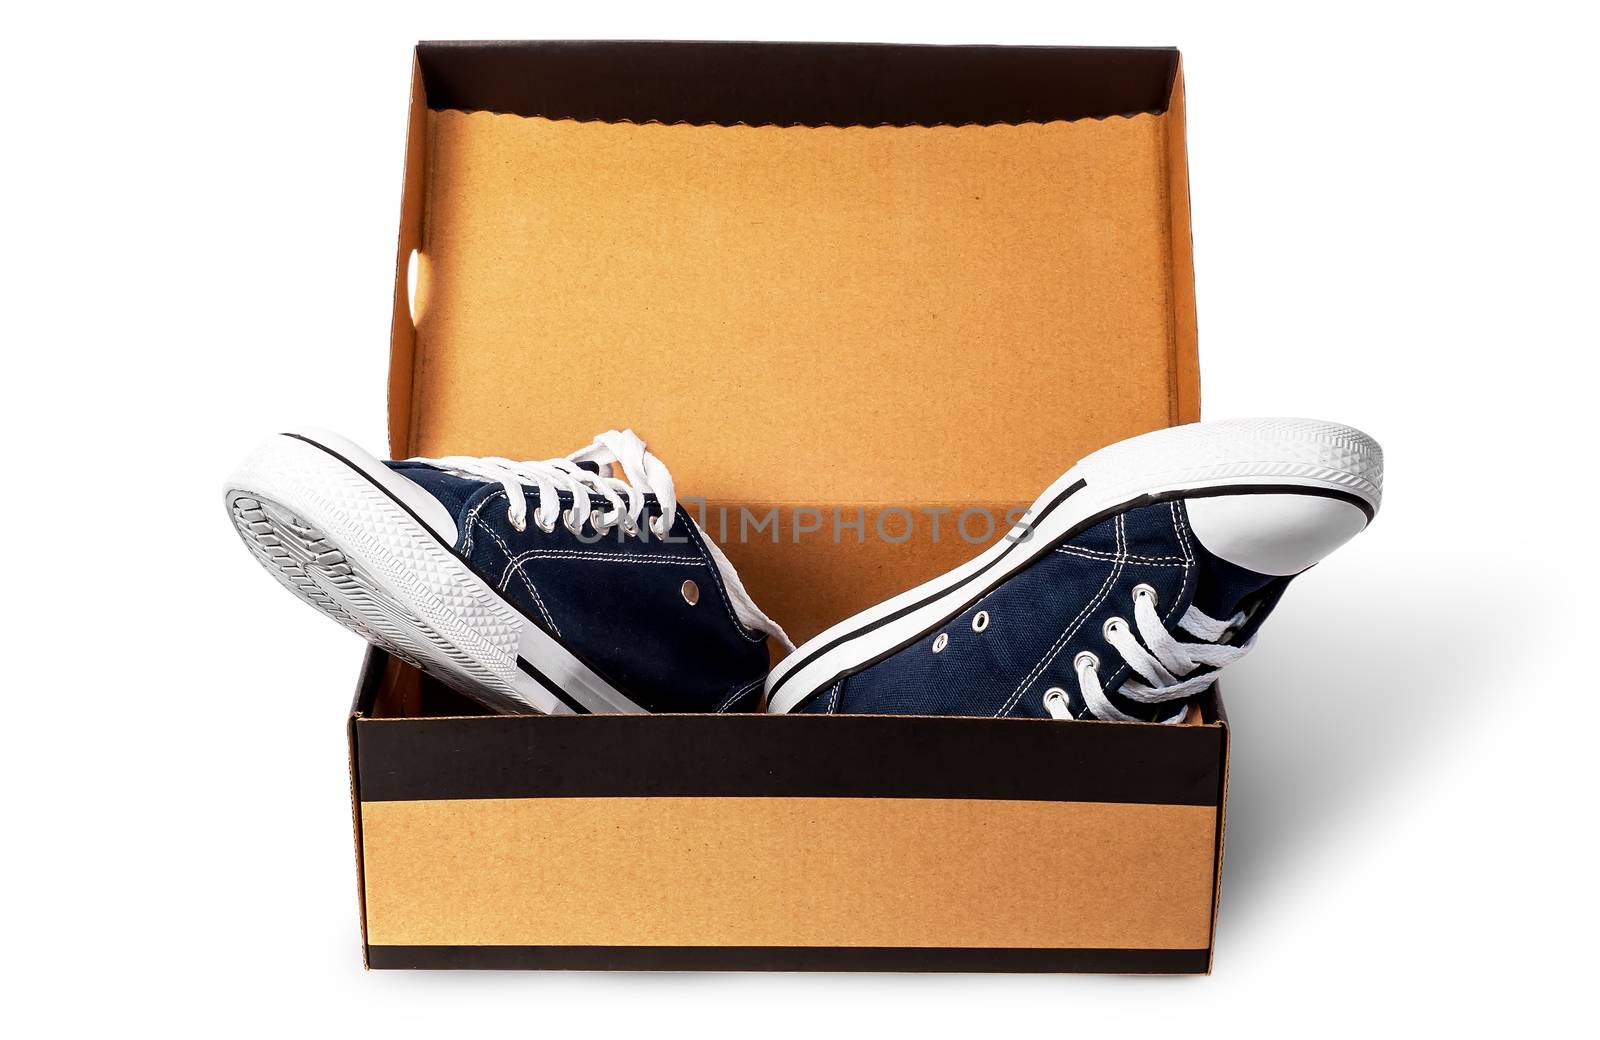 Dark blue sports shoes in cardboard box isolated on white background